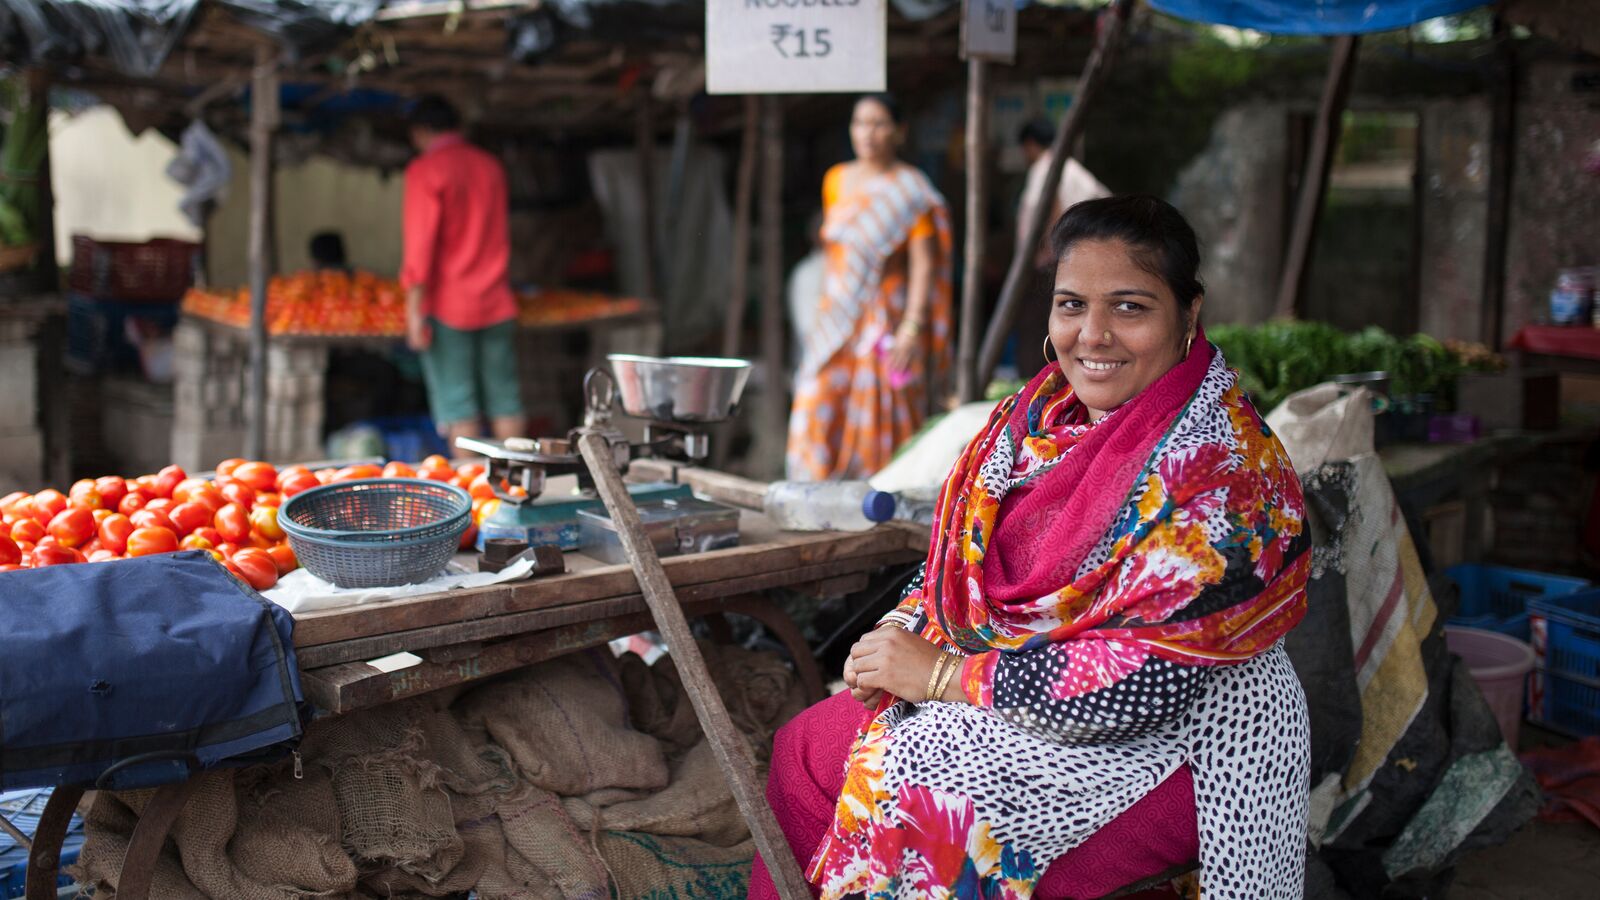 svasti-giving-india-underserved-access-to-microfinance-options